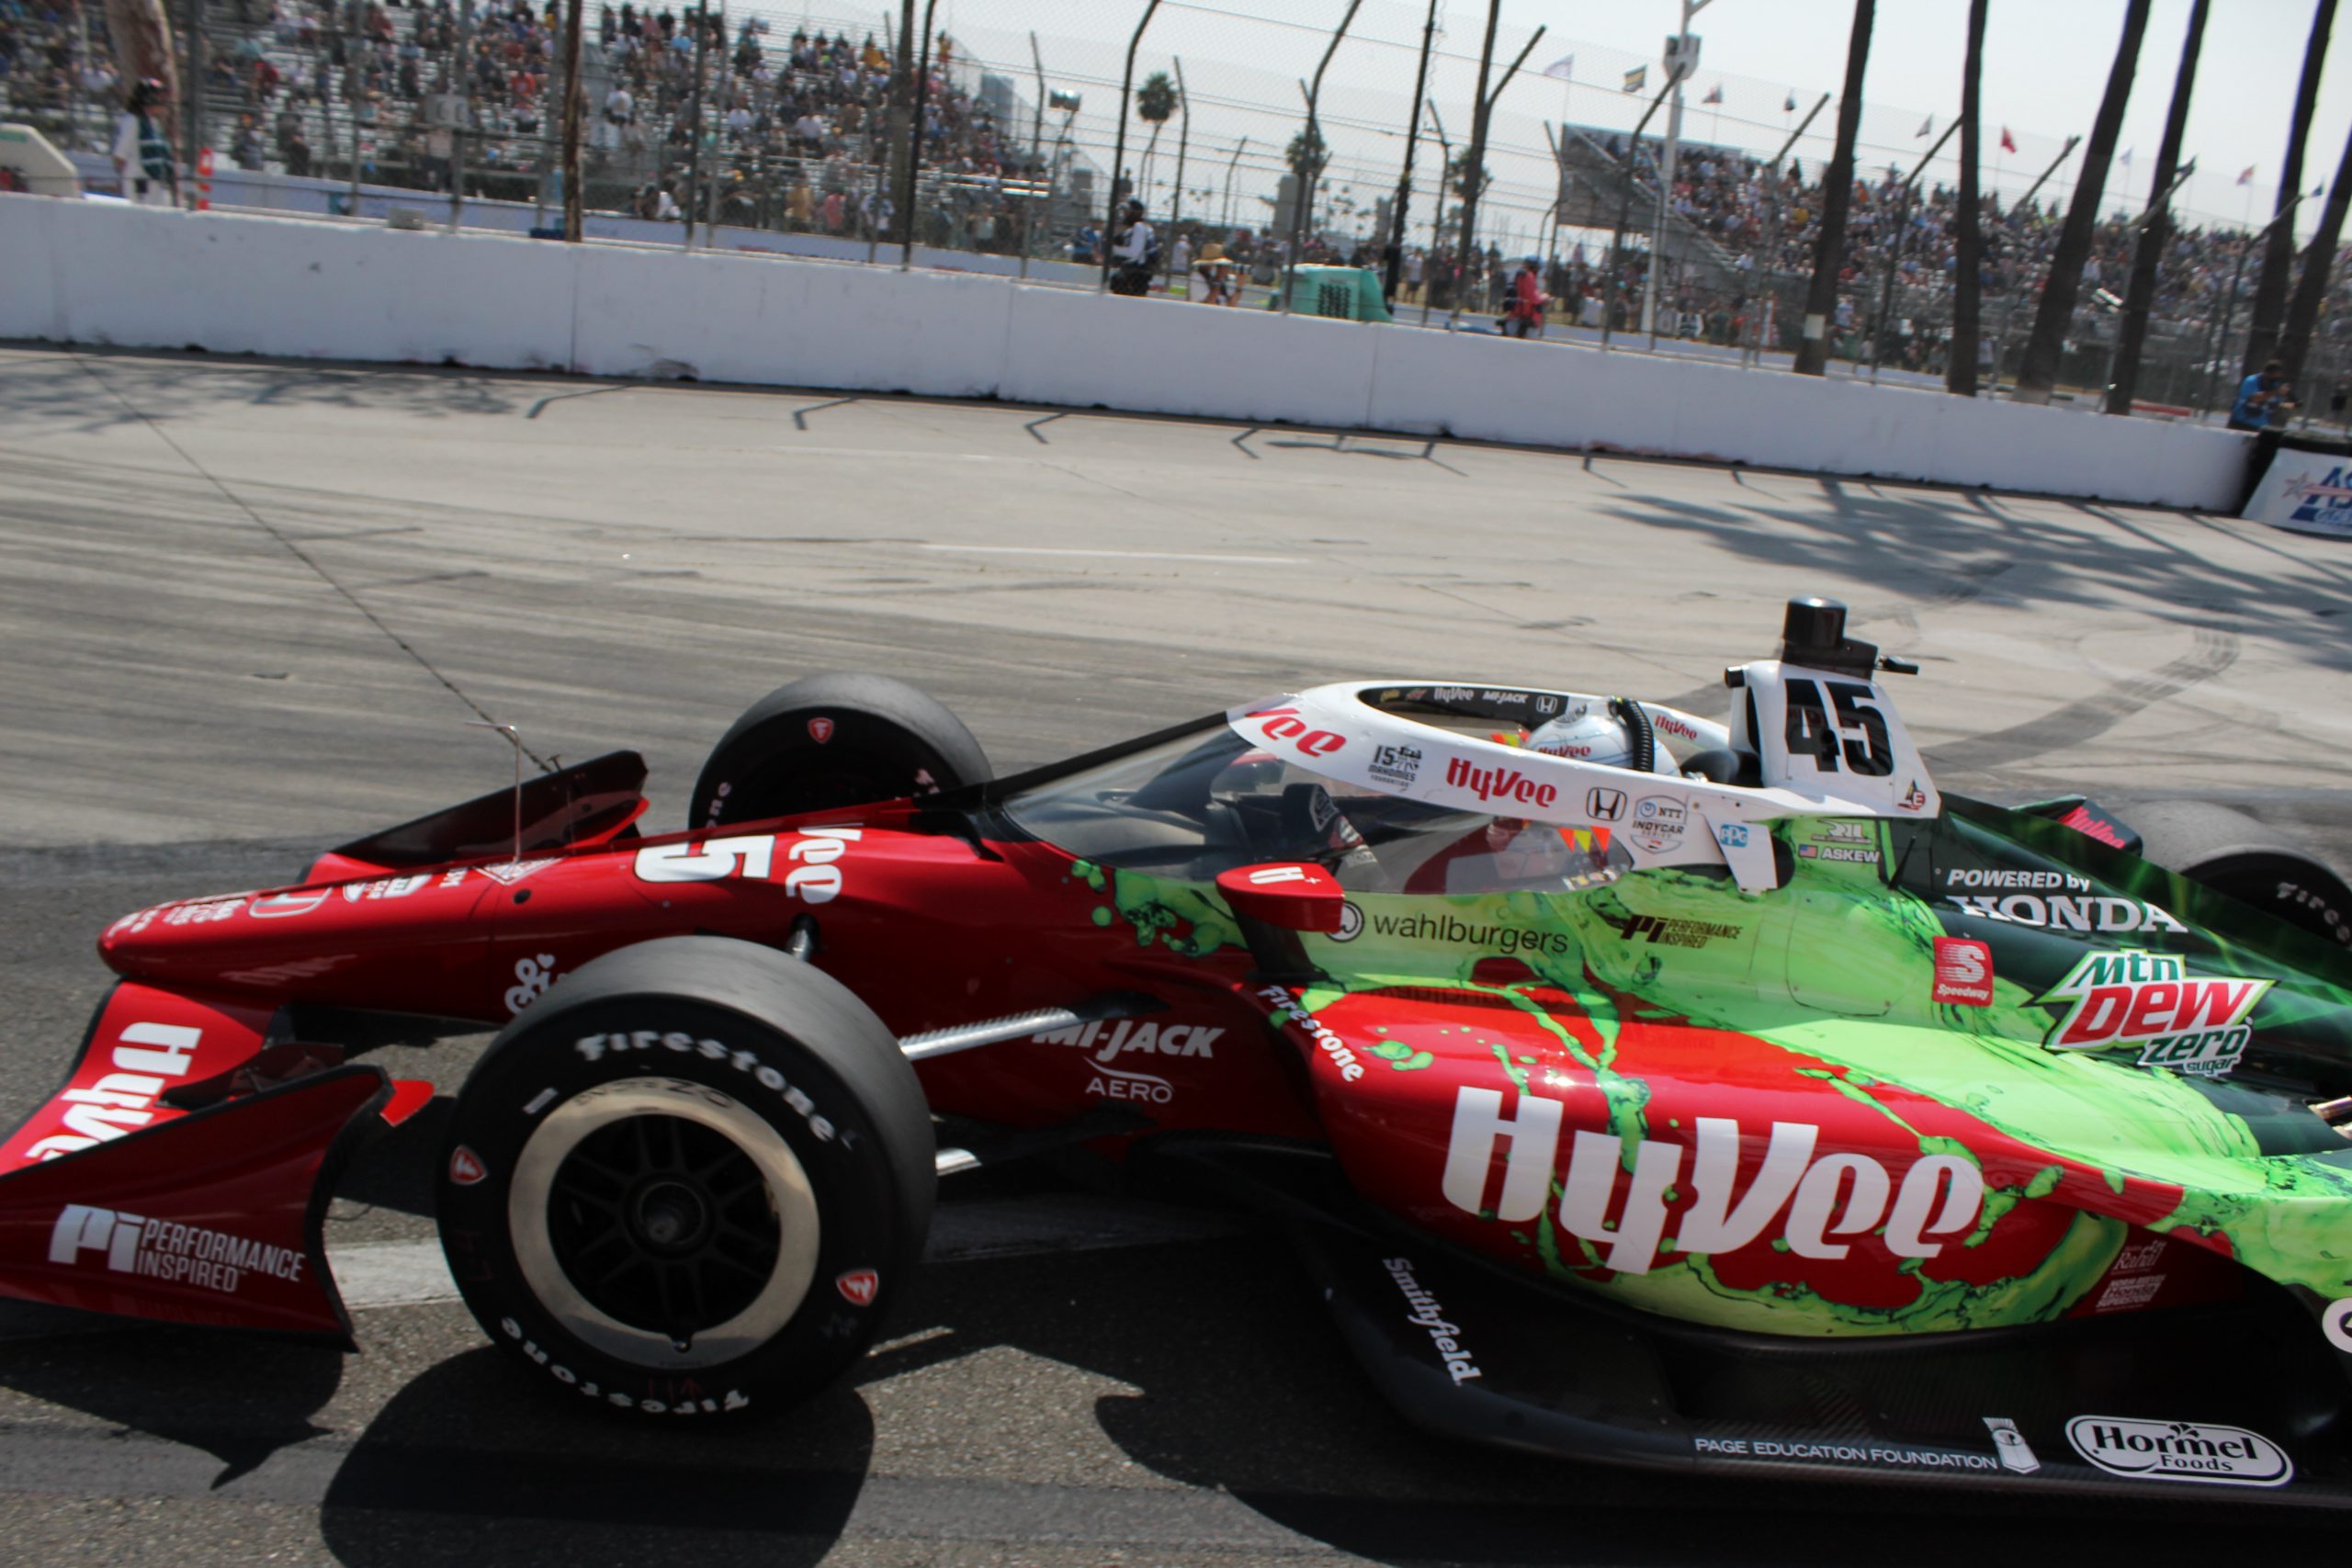 With the advent of wraps for race cars these days, the Rahal Letterman Lanigan team gives Oliver Askew one of the most intricate and colorful sponsor liveries of any car on the grid. Here Askew prepares to muscle his way through the Turn 11 hairpin.